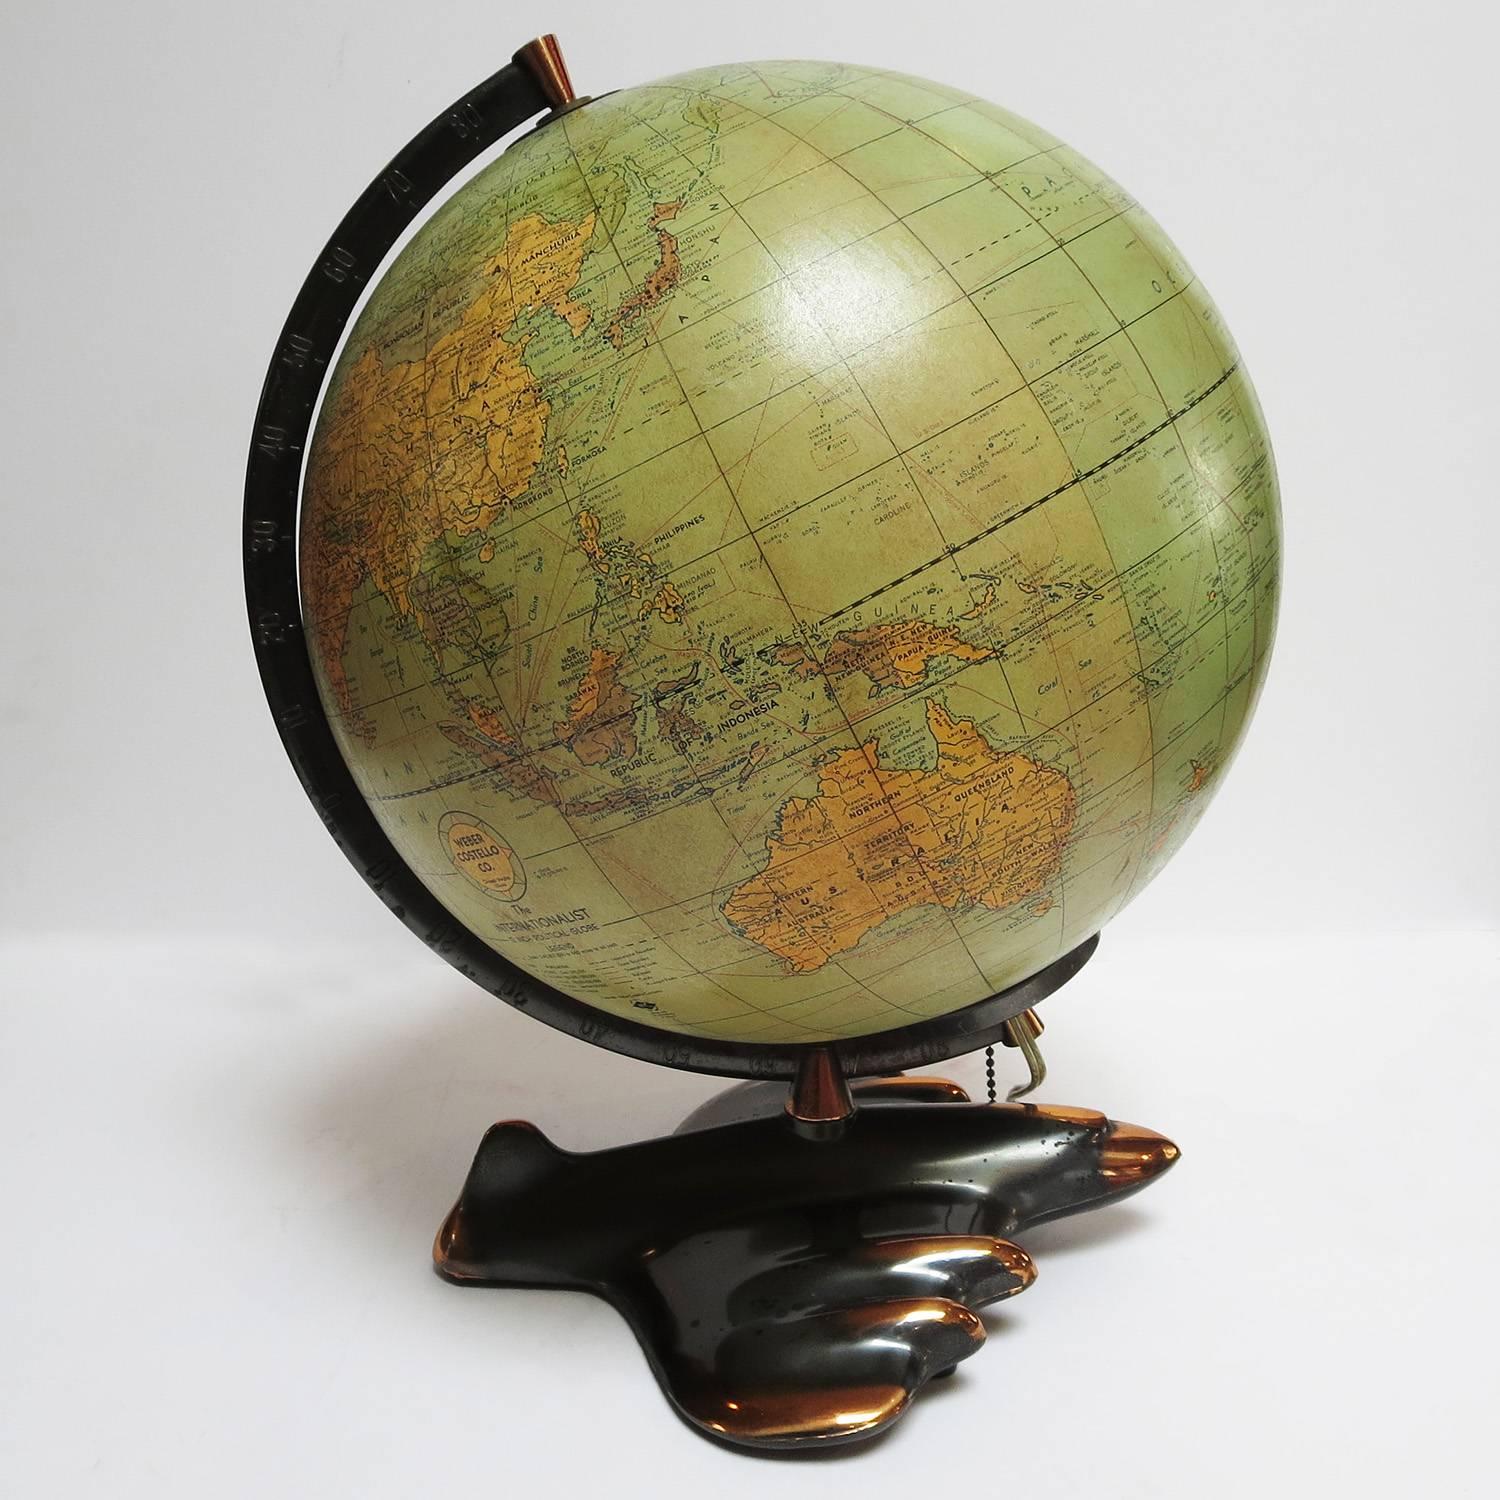 This wonderful globe was created by Weber-Costello Co. Of Chicago. This 